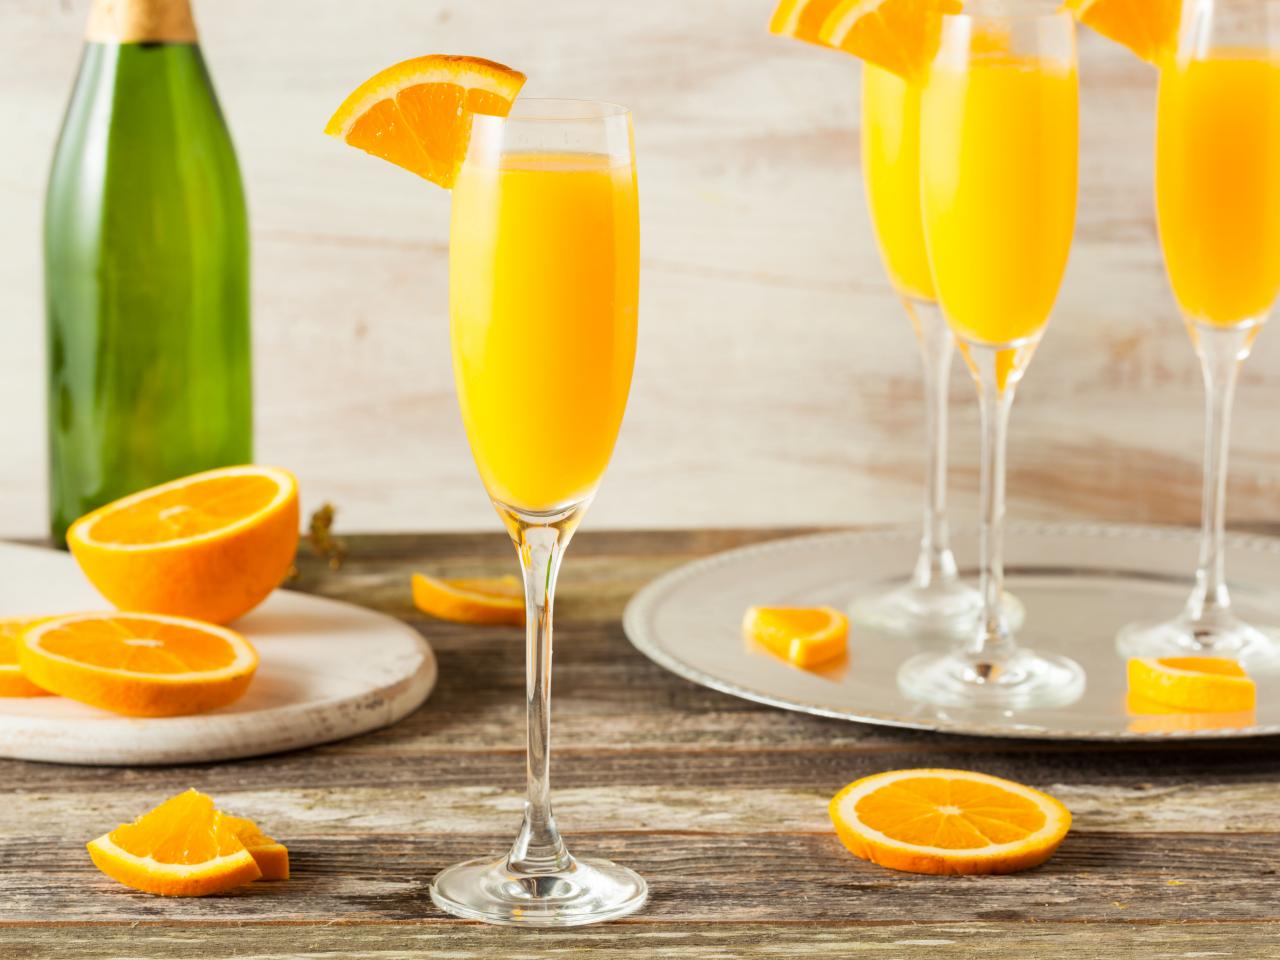 https://food.fnr.sndimg.com/content/dam/images/food/fullset/2021/09/21/mimosa-oranges-champagne-bottle-silver-tray-wood-suface.jpg.rend.hgtvcom.1280.960.suffix/1632260197794.jpeg